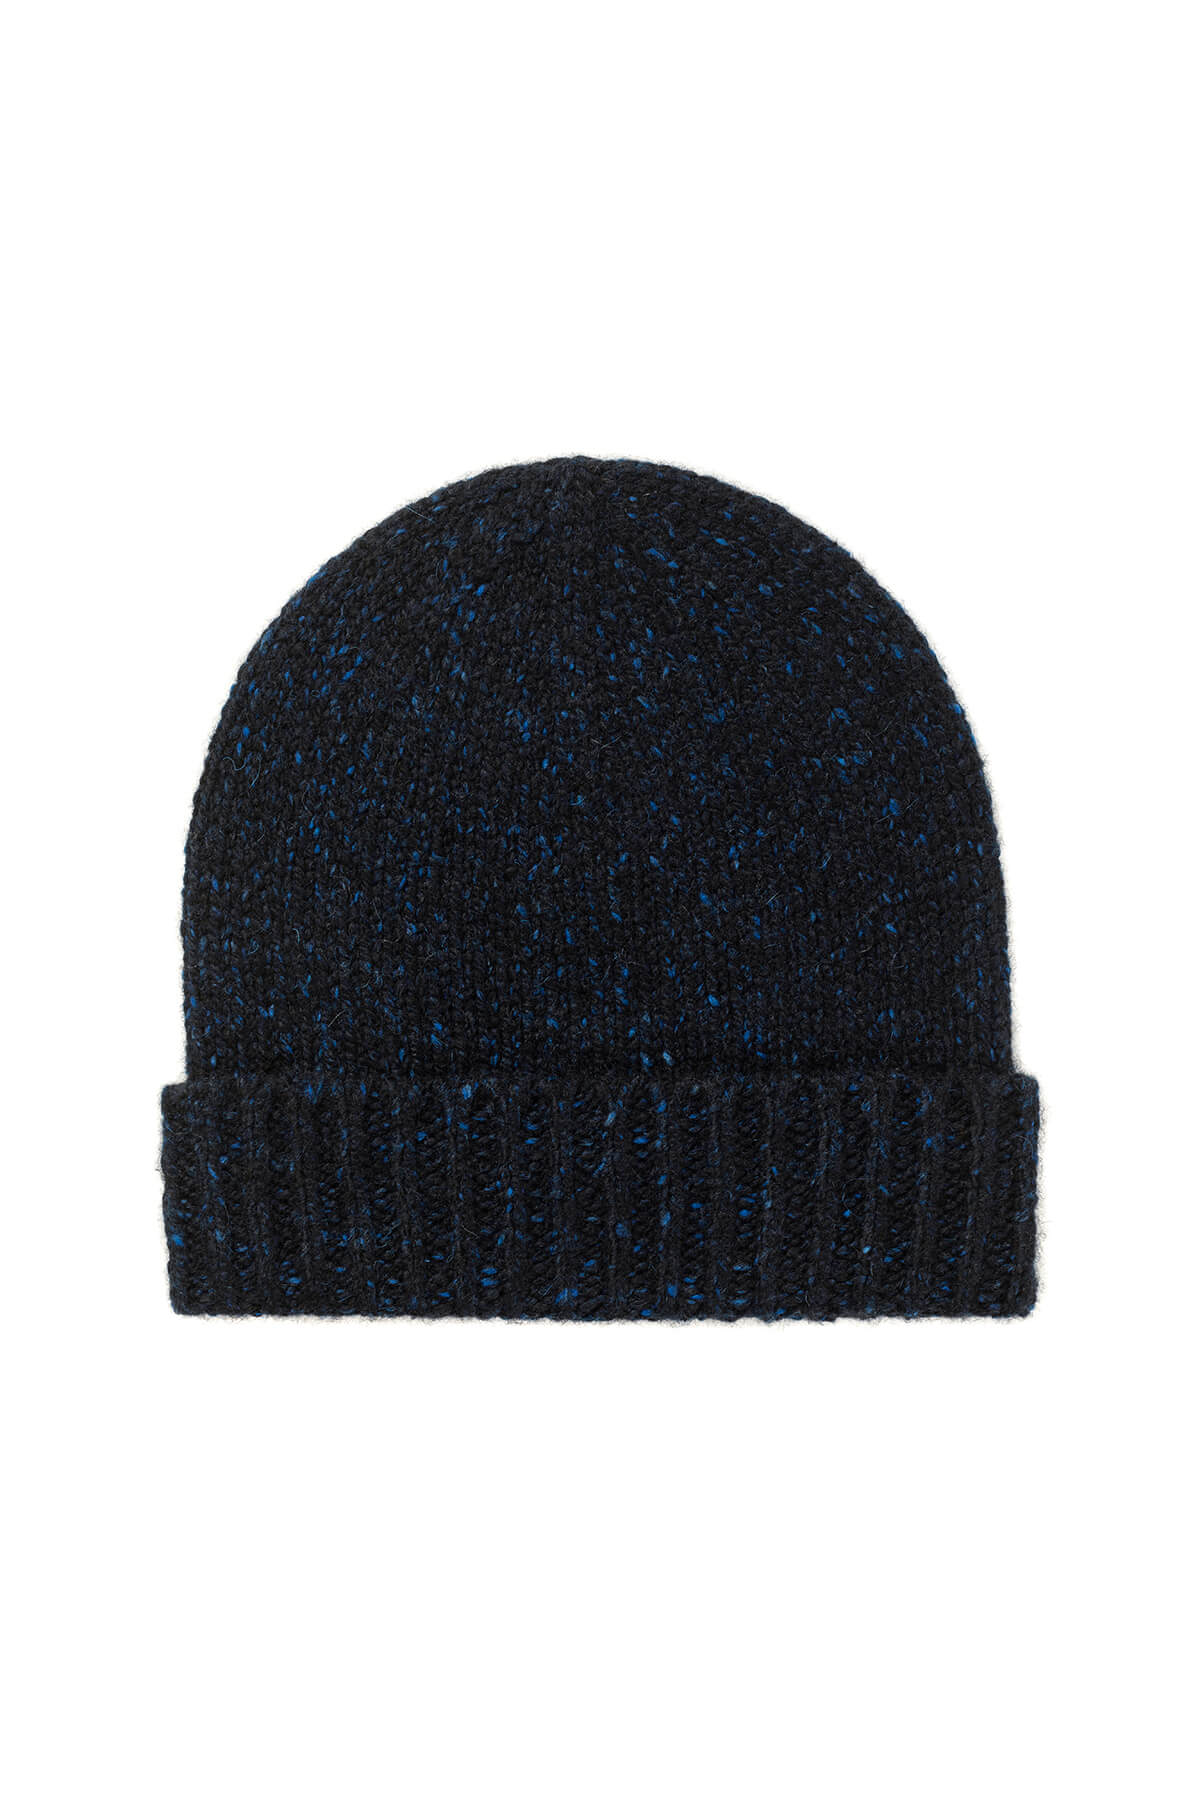 Johnstons of Elgin’s Dark Navy Cashmere Donegal Beanie on a white background HAC03247HD7243